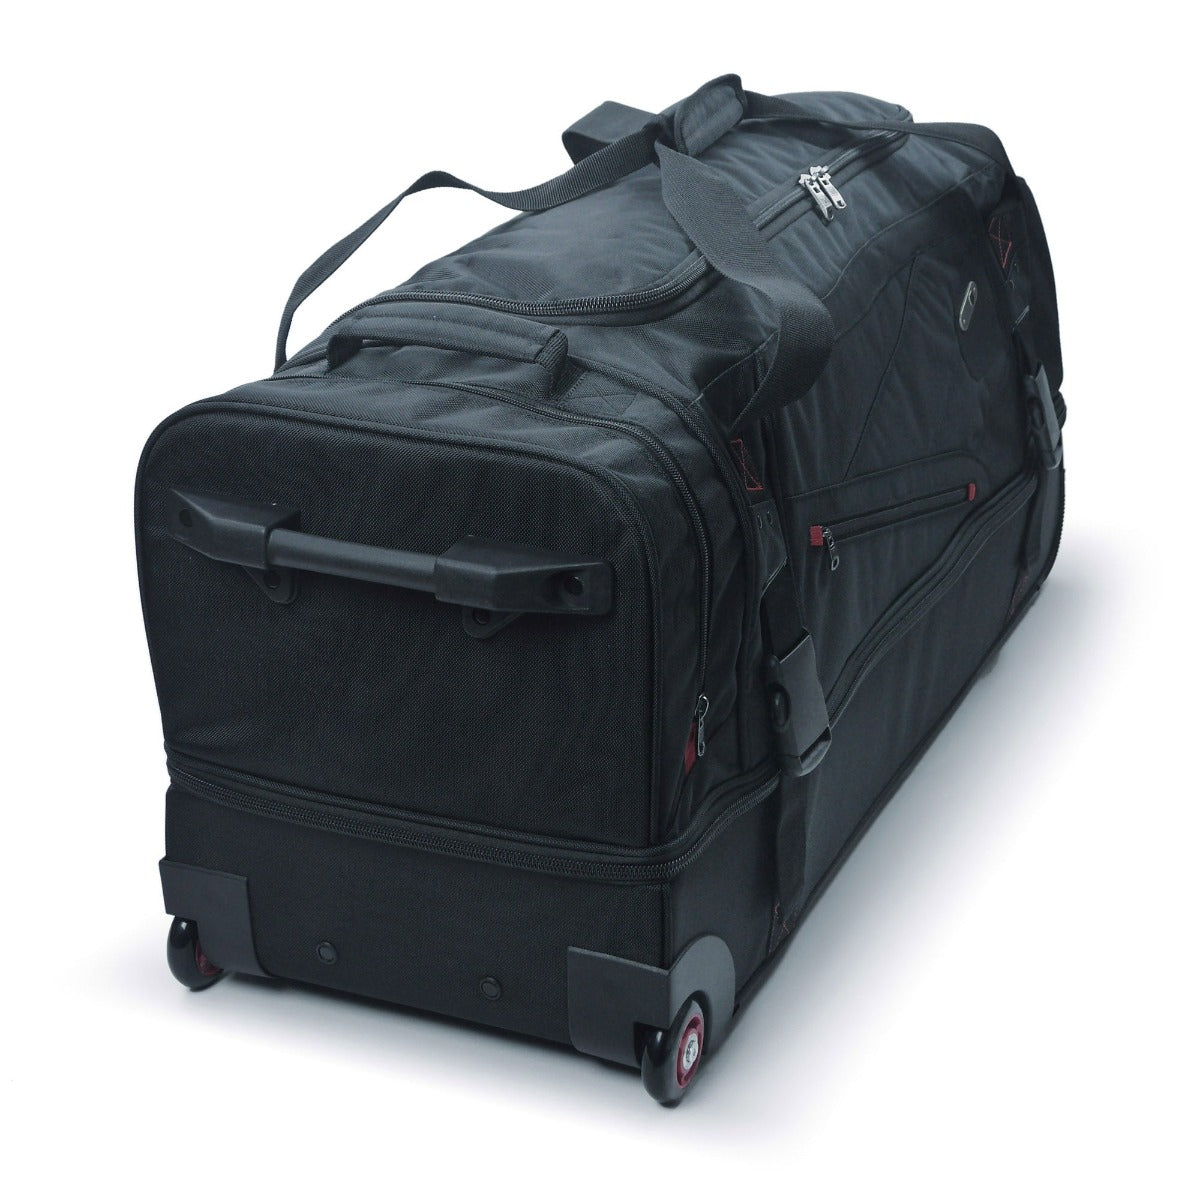 Tour Manager 36-inch extra-large wheeled rolling duffle bag in black